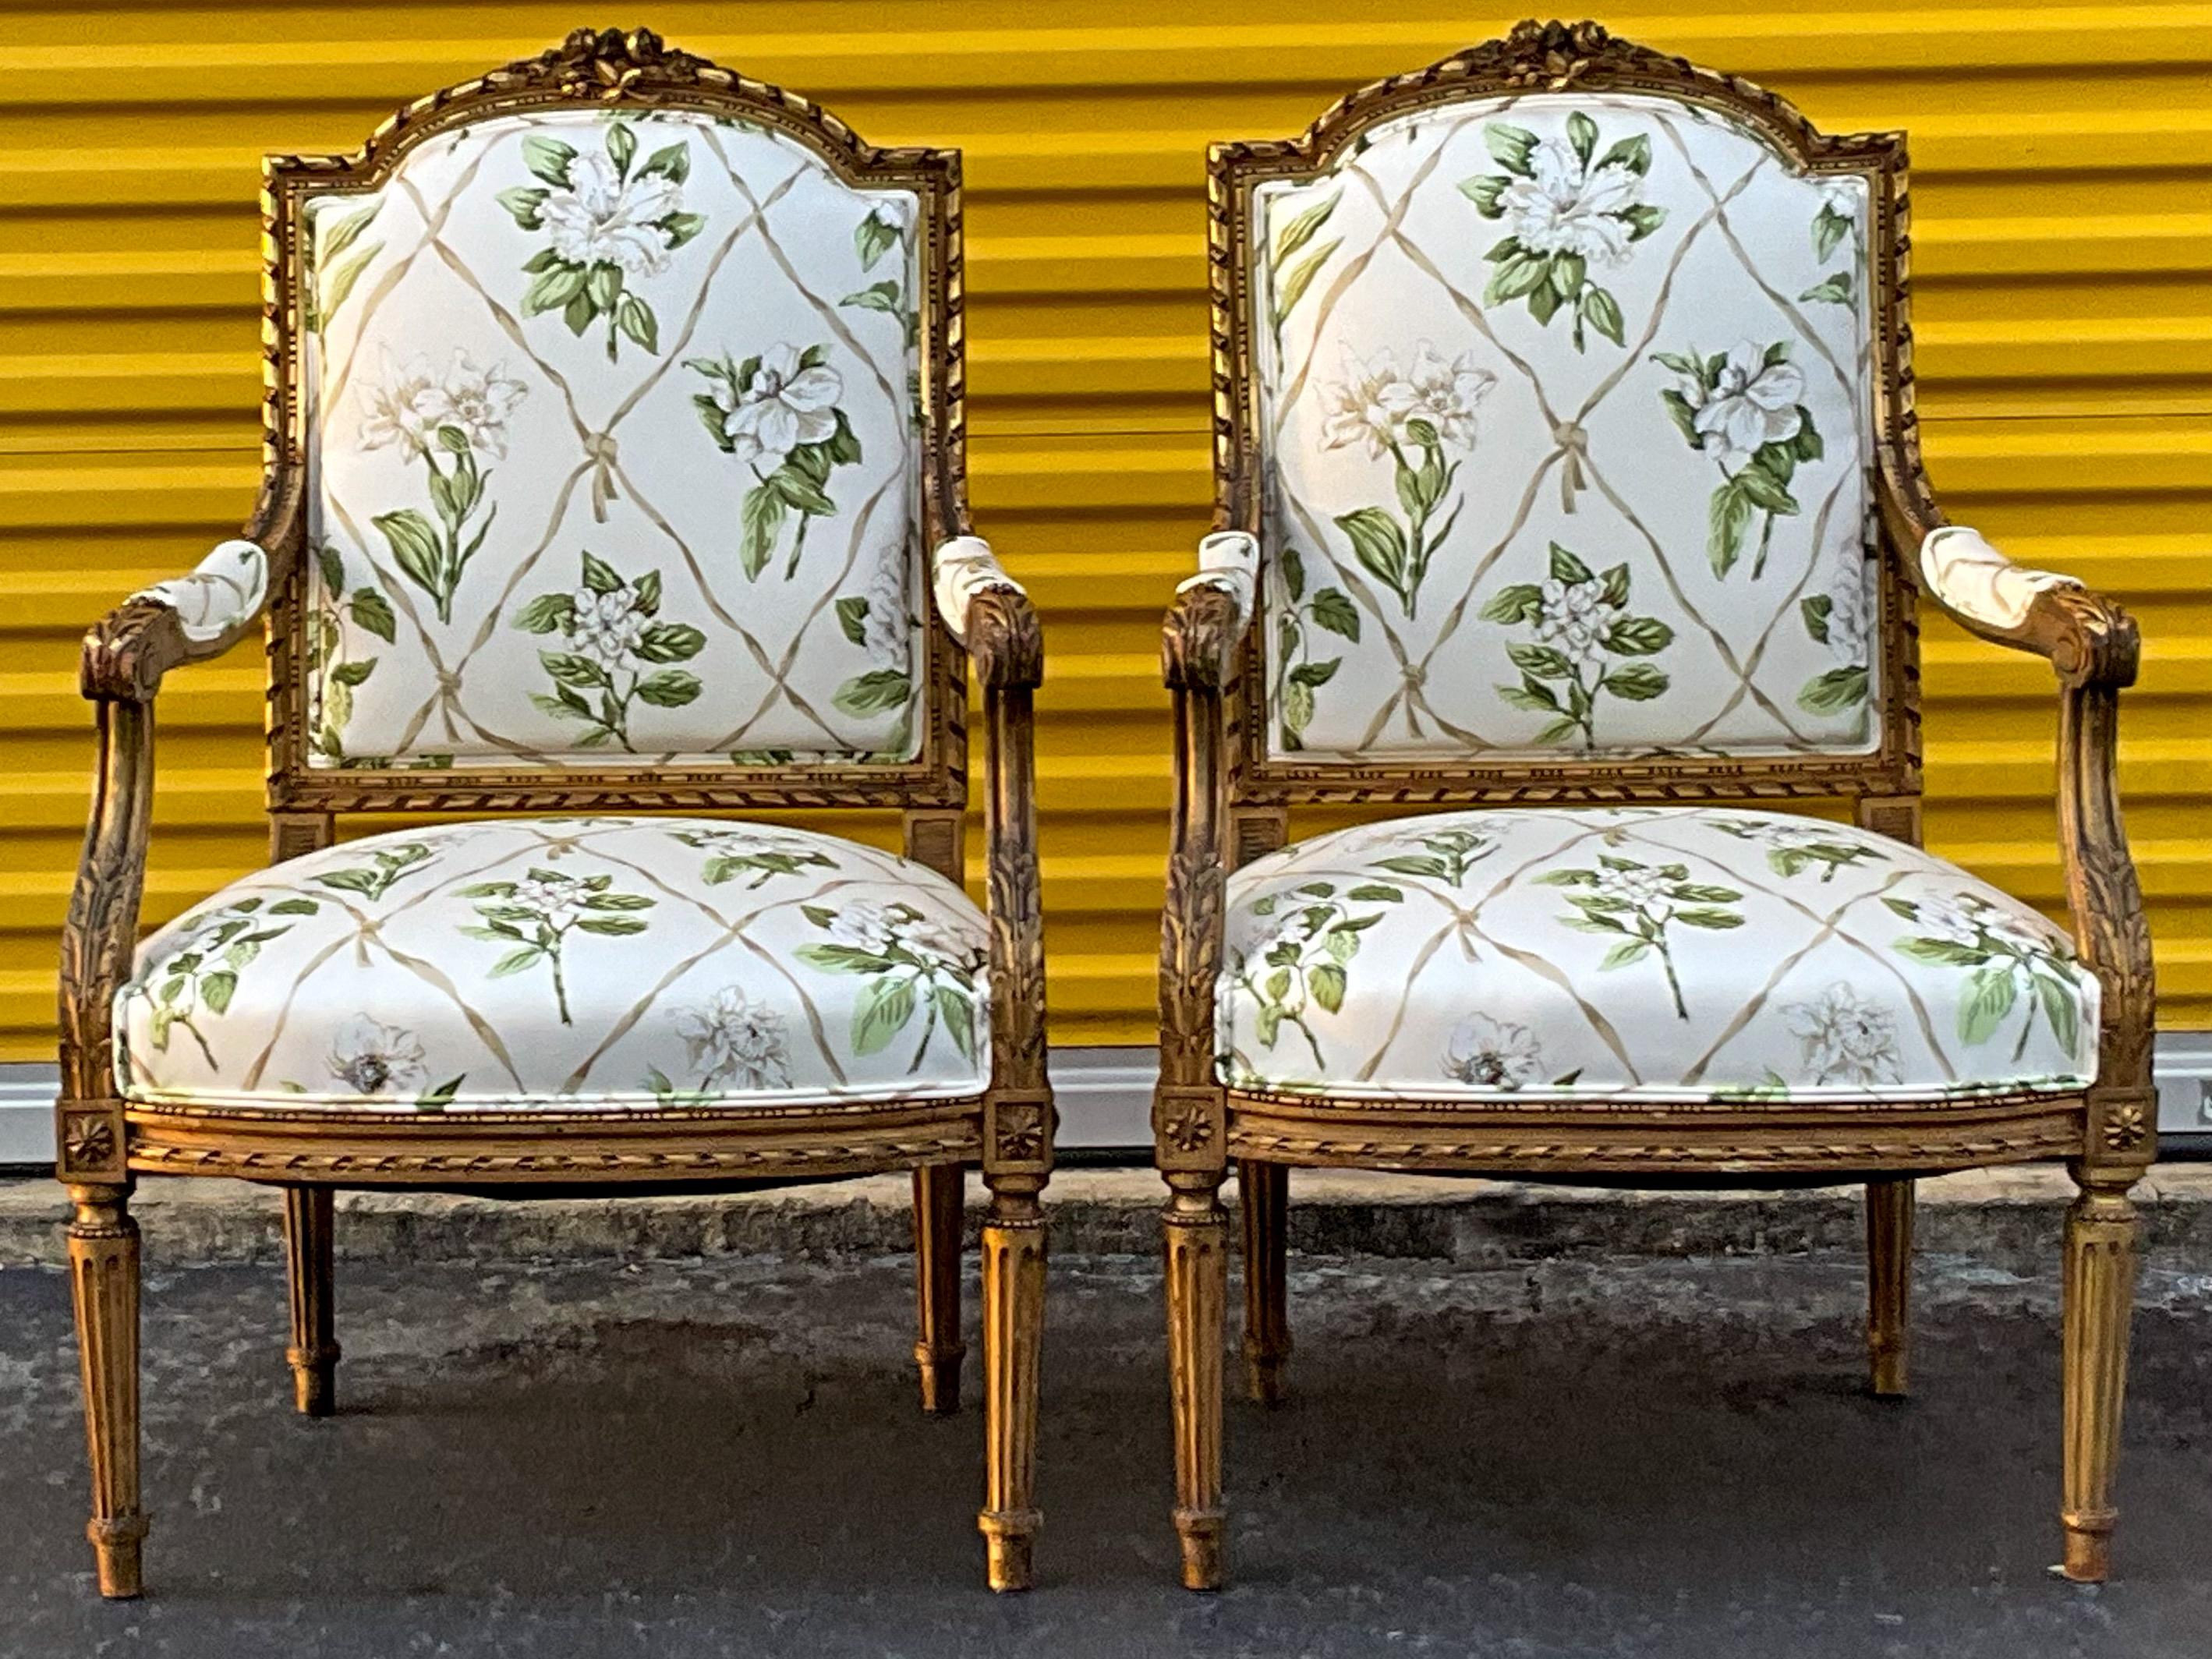 Upholstery 19th-C. Pair of French Louis XVI Style Carved Giltwood Bergere Chairs